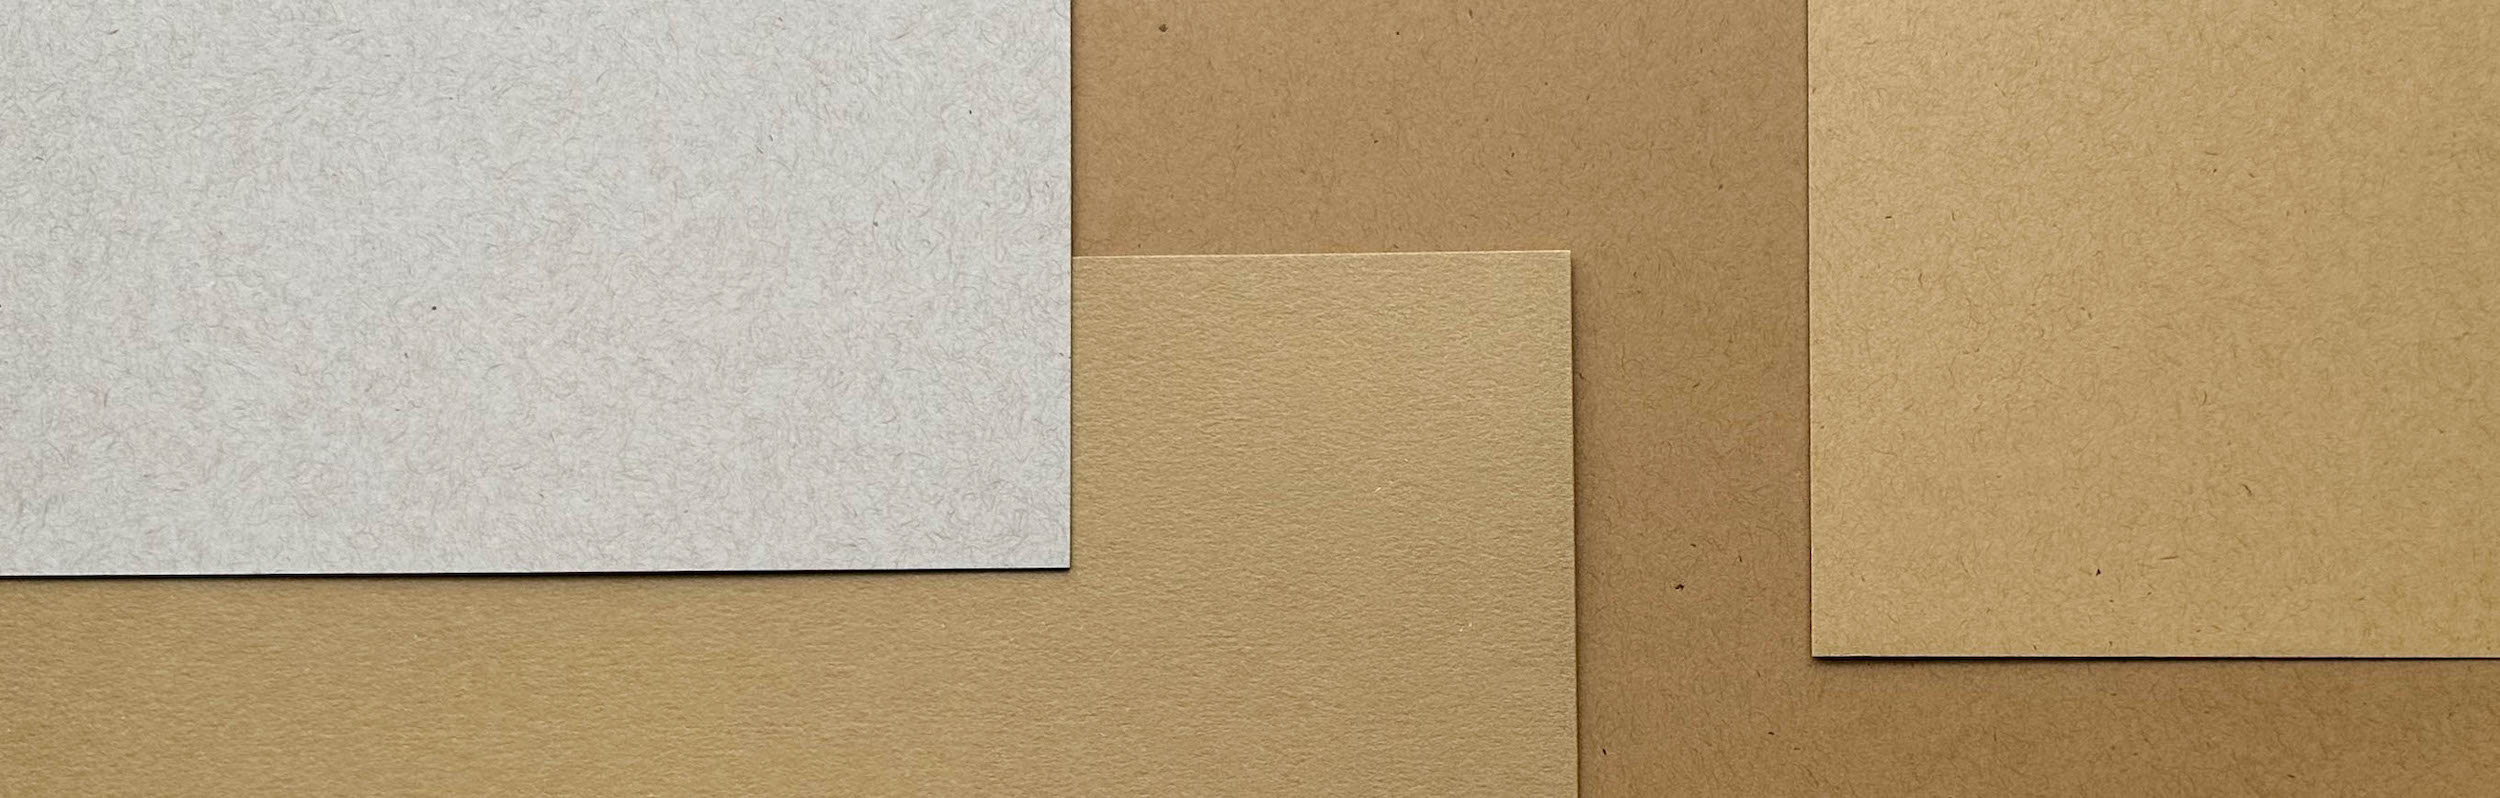 Paper Bag Kraft 100% Recycled Cardstock - 12 x 12 inch - Premium 100 lb. Heavyweight Cover - 25 Sheets from Cardstock Warehouse